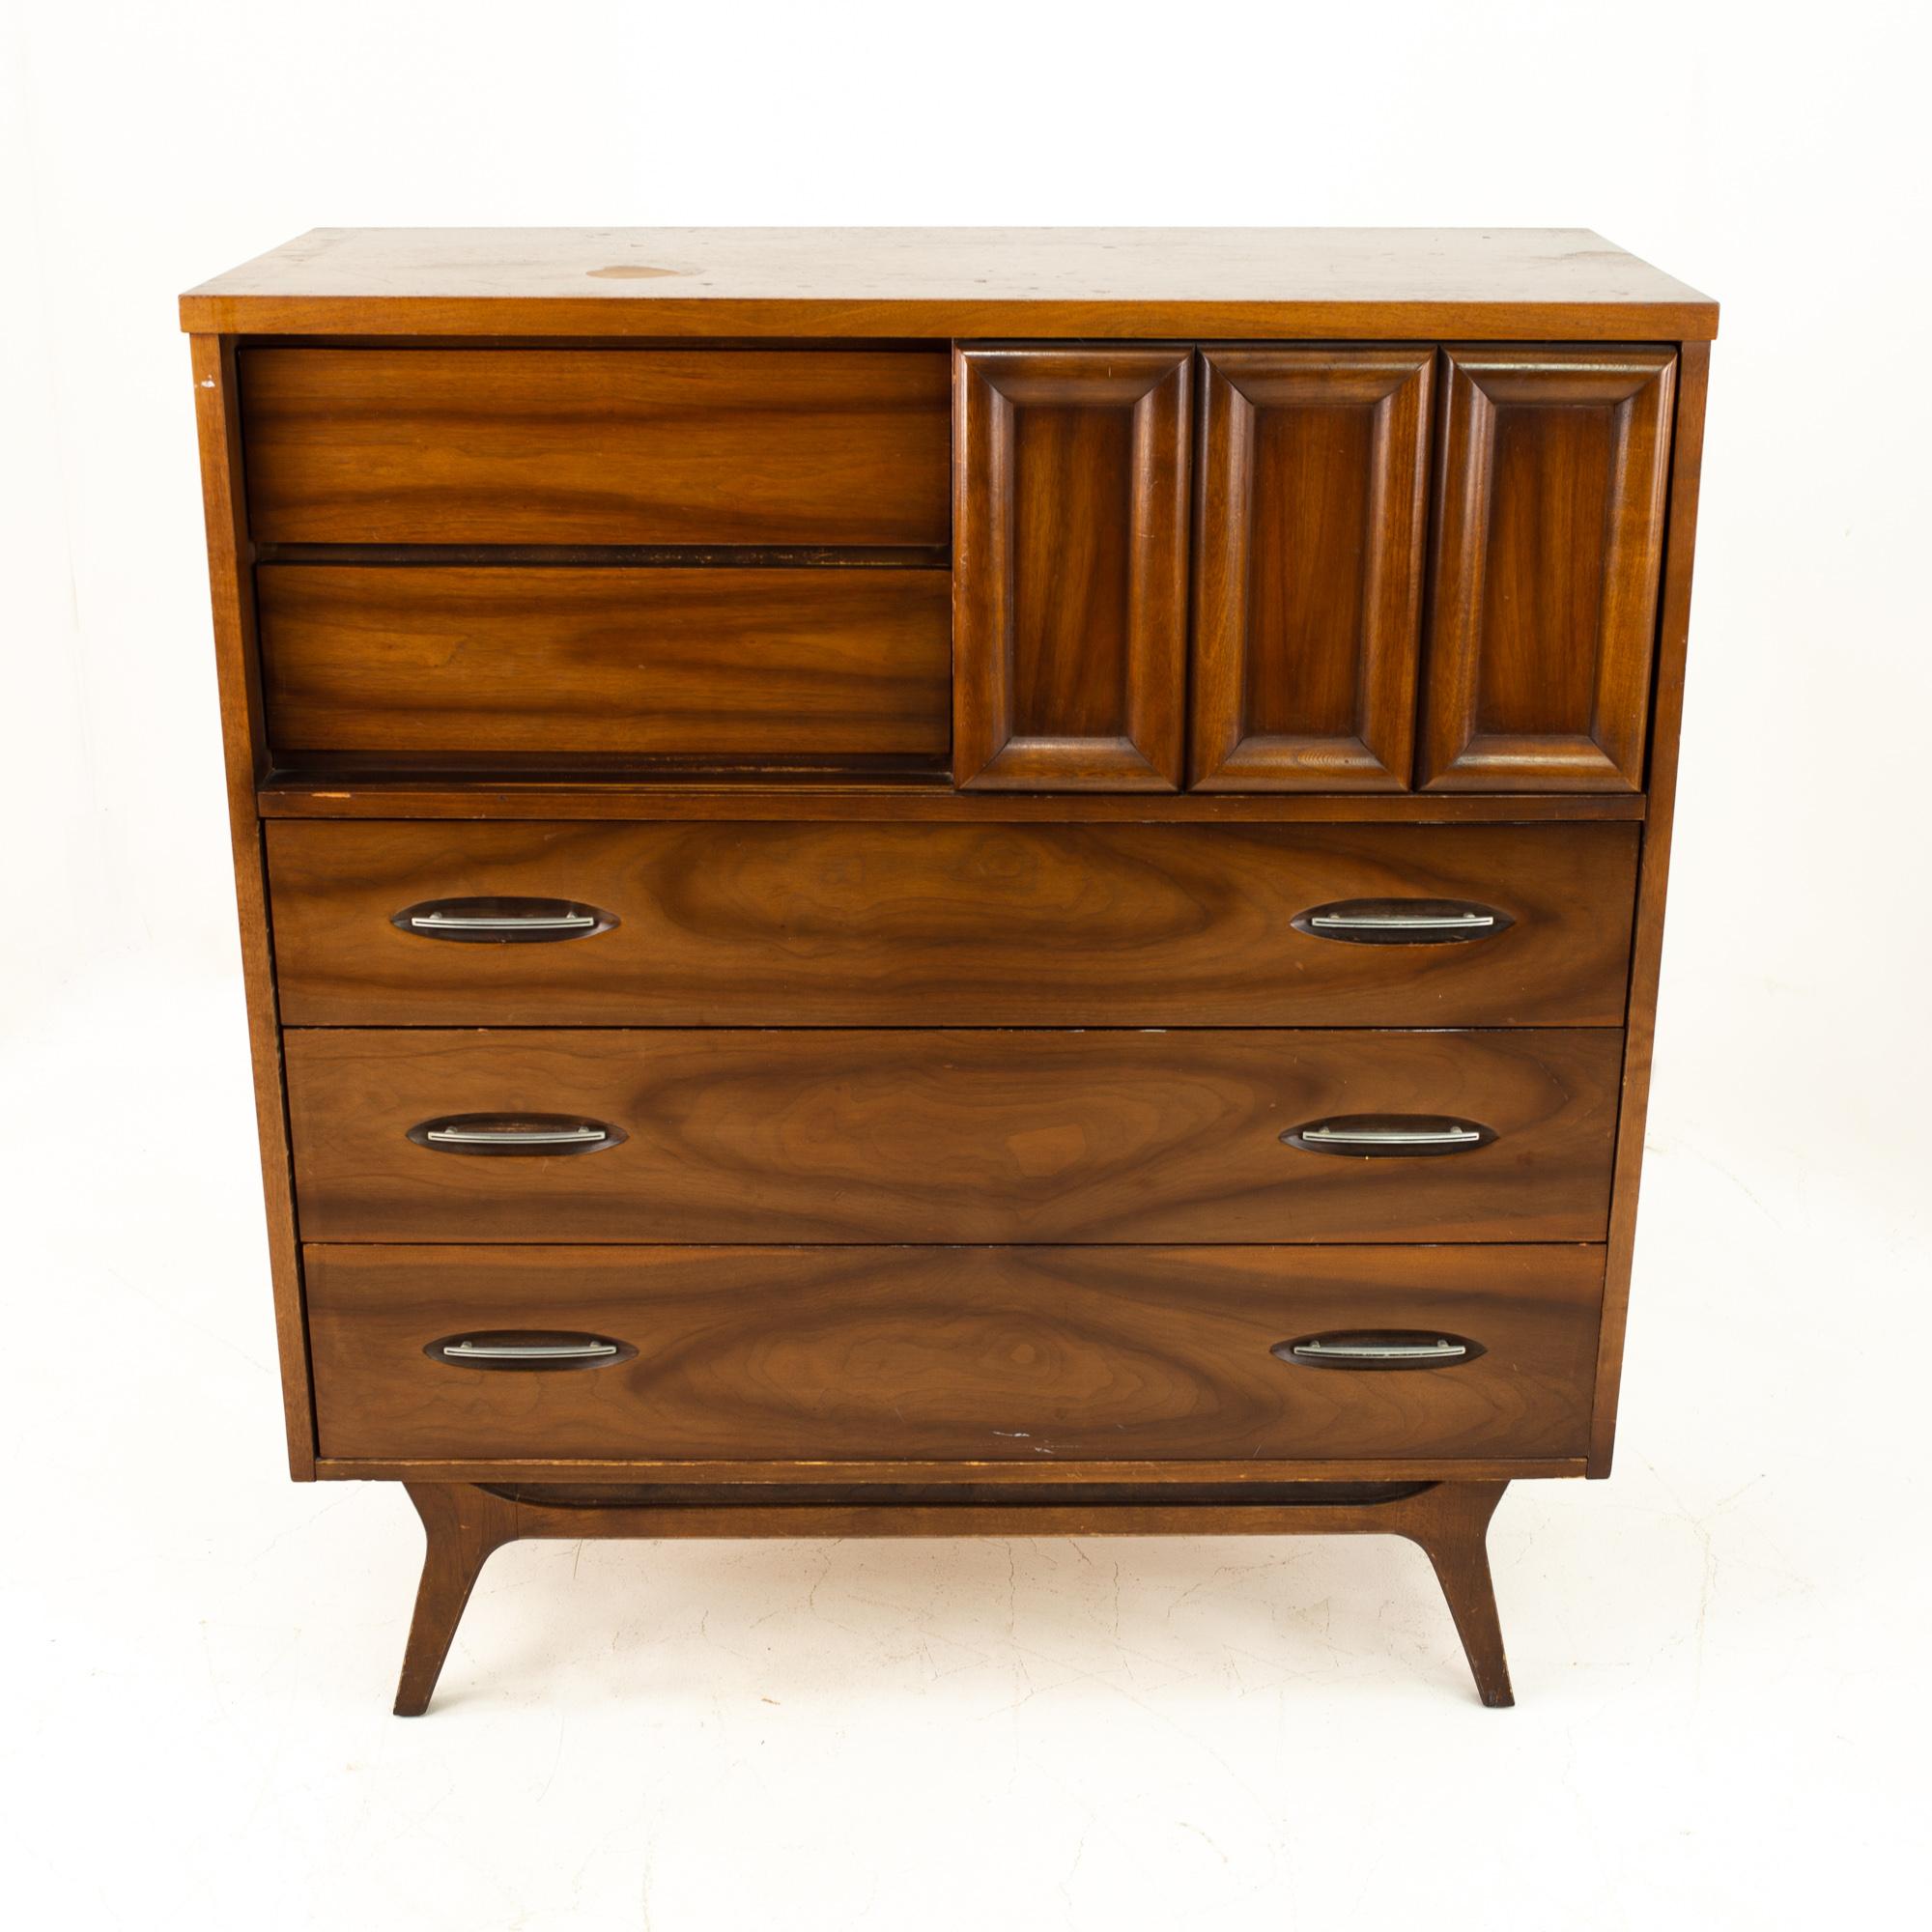 Mid Century magna highboy
Highboy measures: 42 wide x 18 deep x 46.5 high

This price includes getting this piece in what we call restored vintage condition. That means the piece is permanently fixed upon purchase so it’s free of watermarks, chips